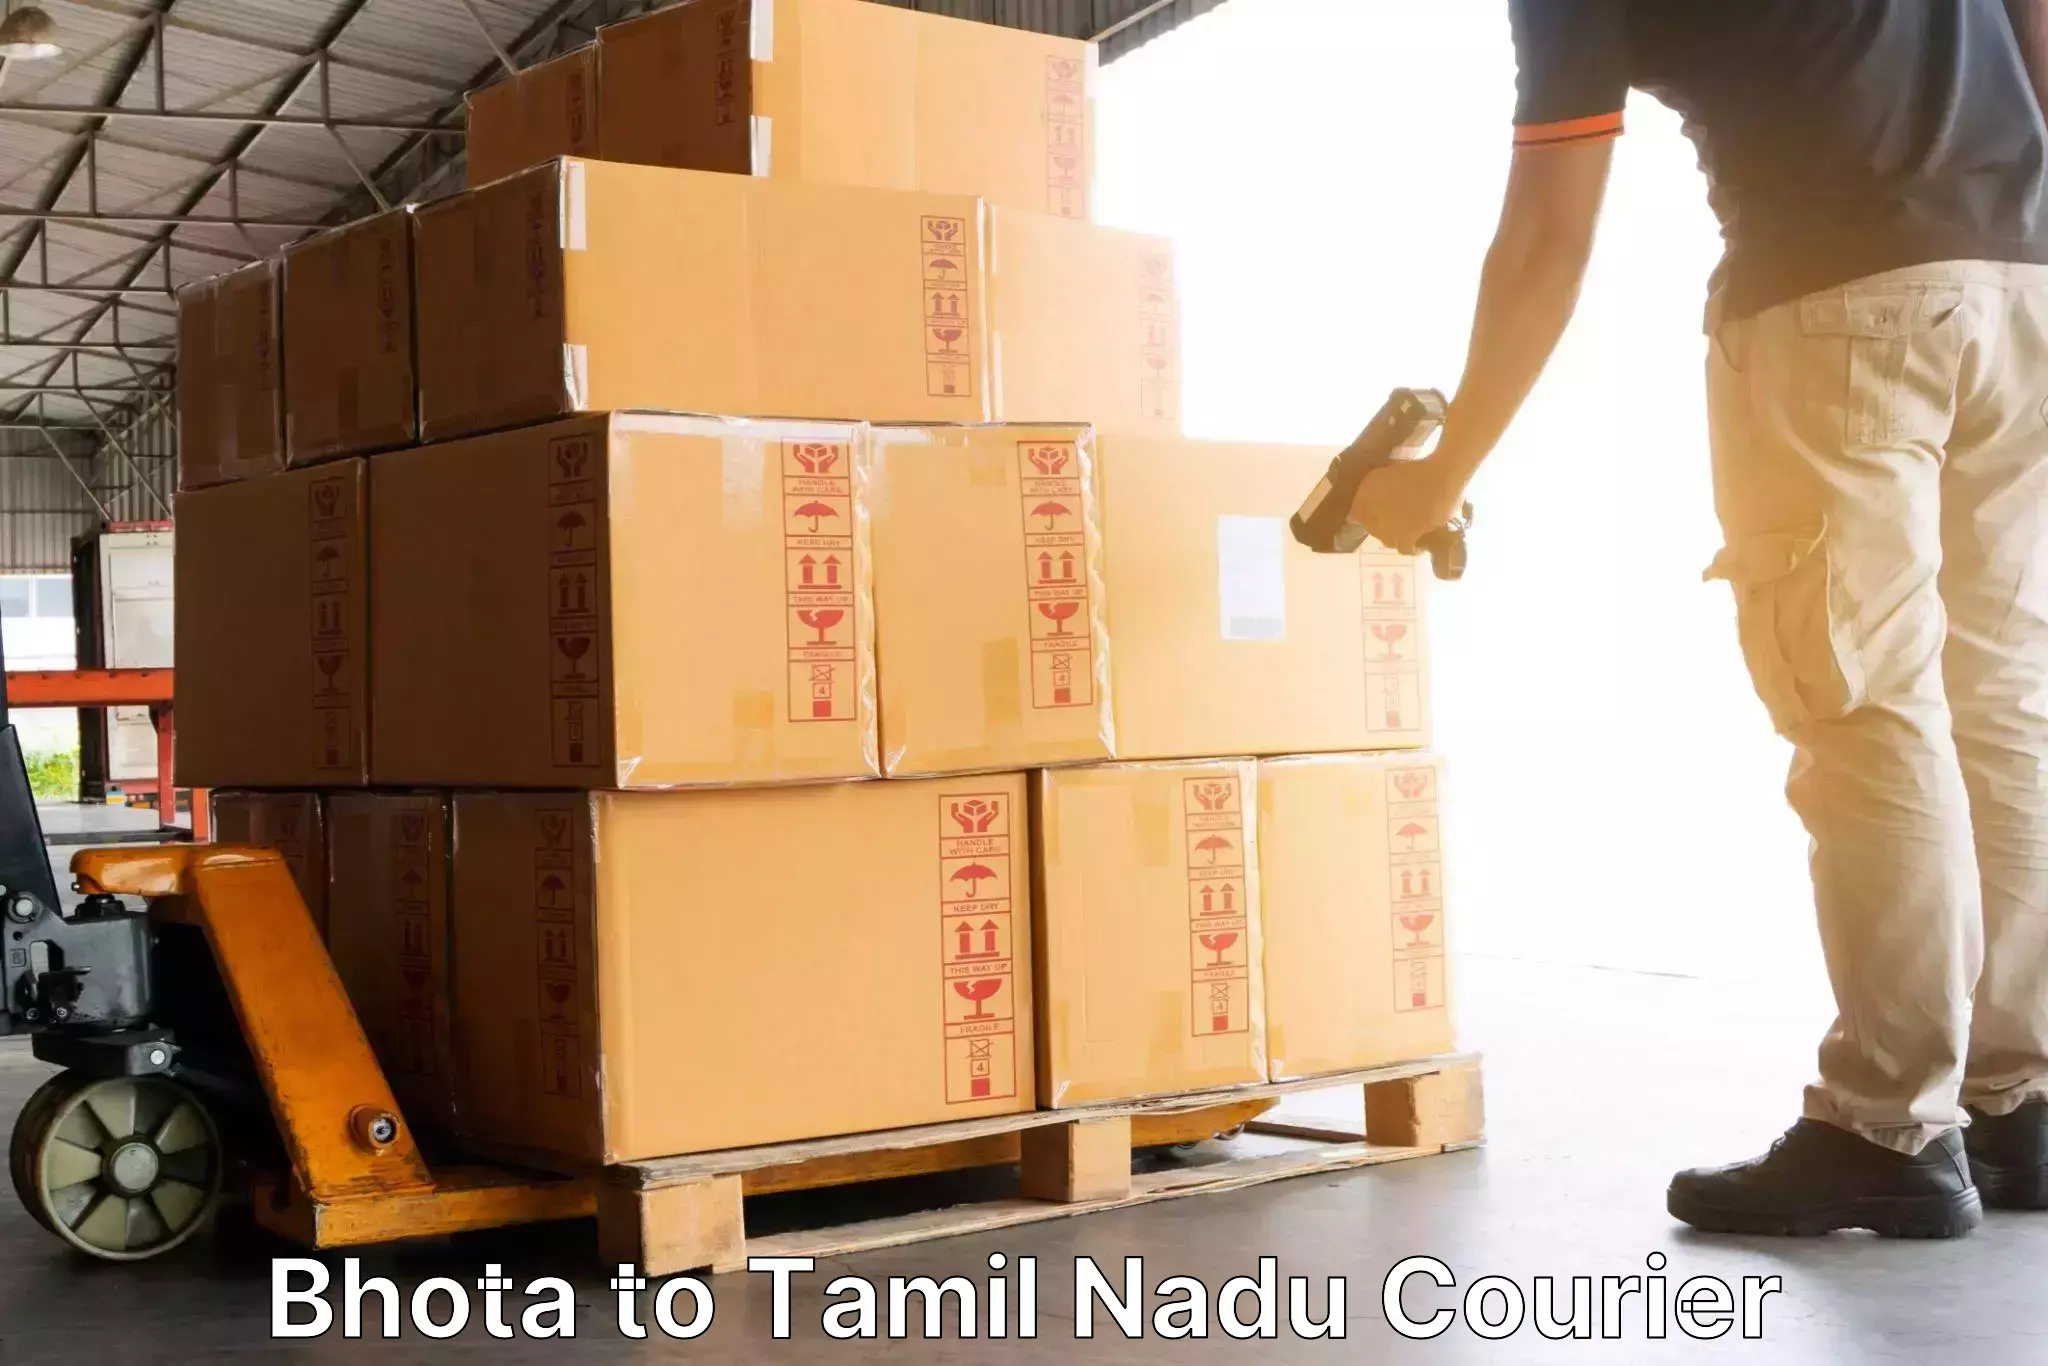 Automated shipping processes in Bhota to Cumbum